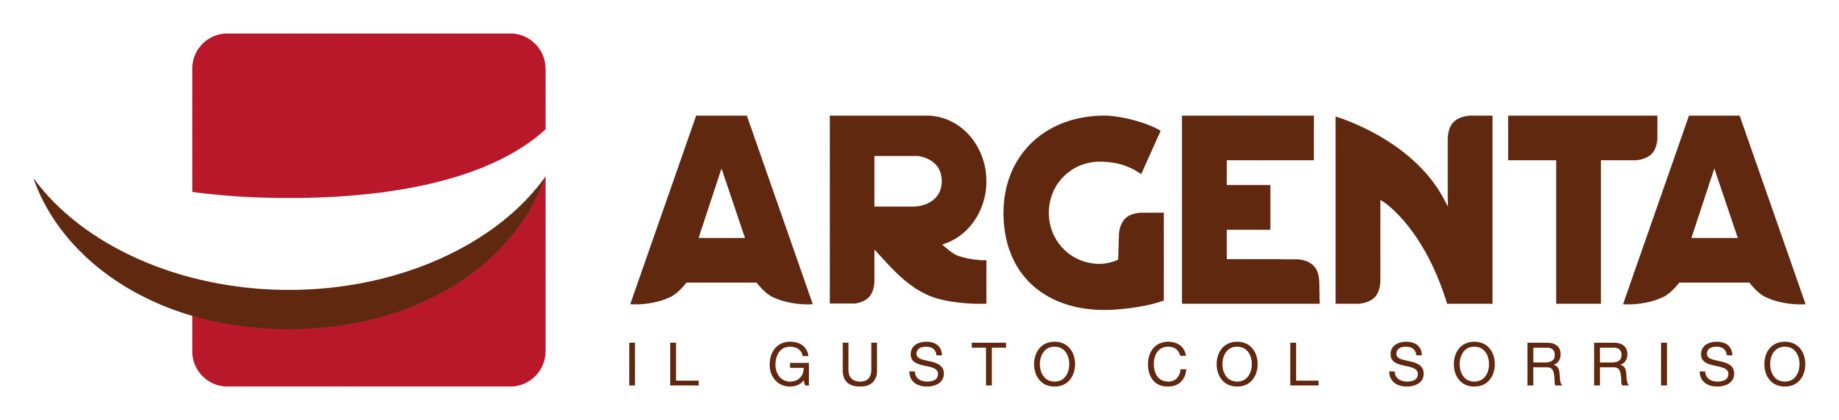 Leading vending company Selecta Group acquires Italy’s Gruppo Argenta